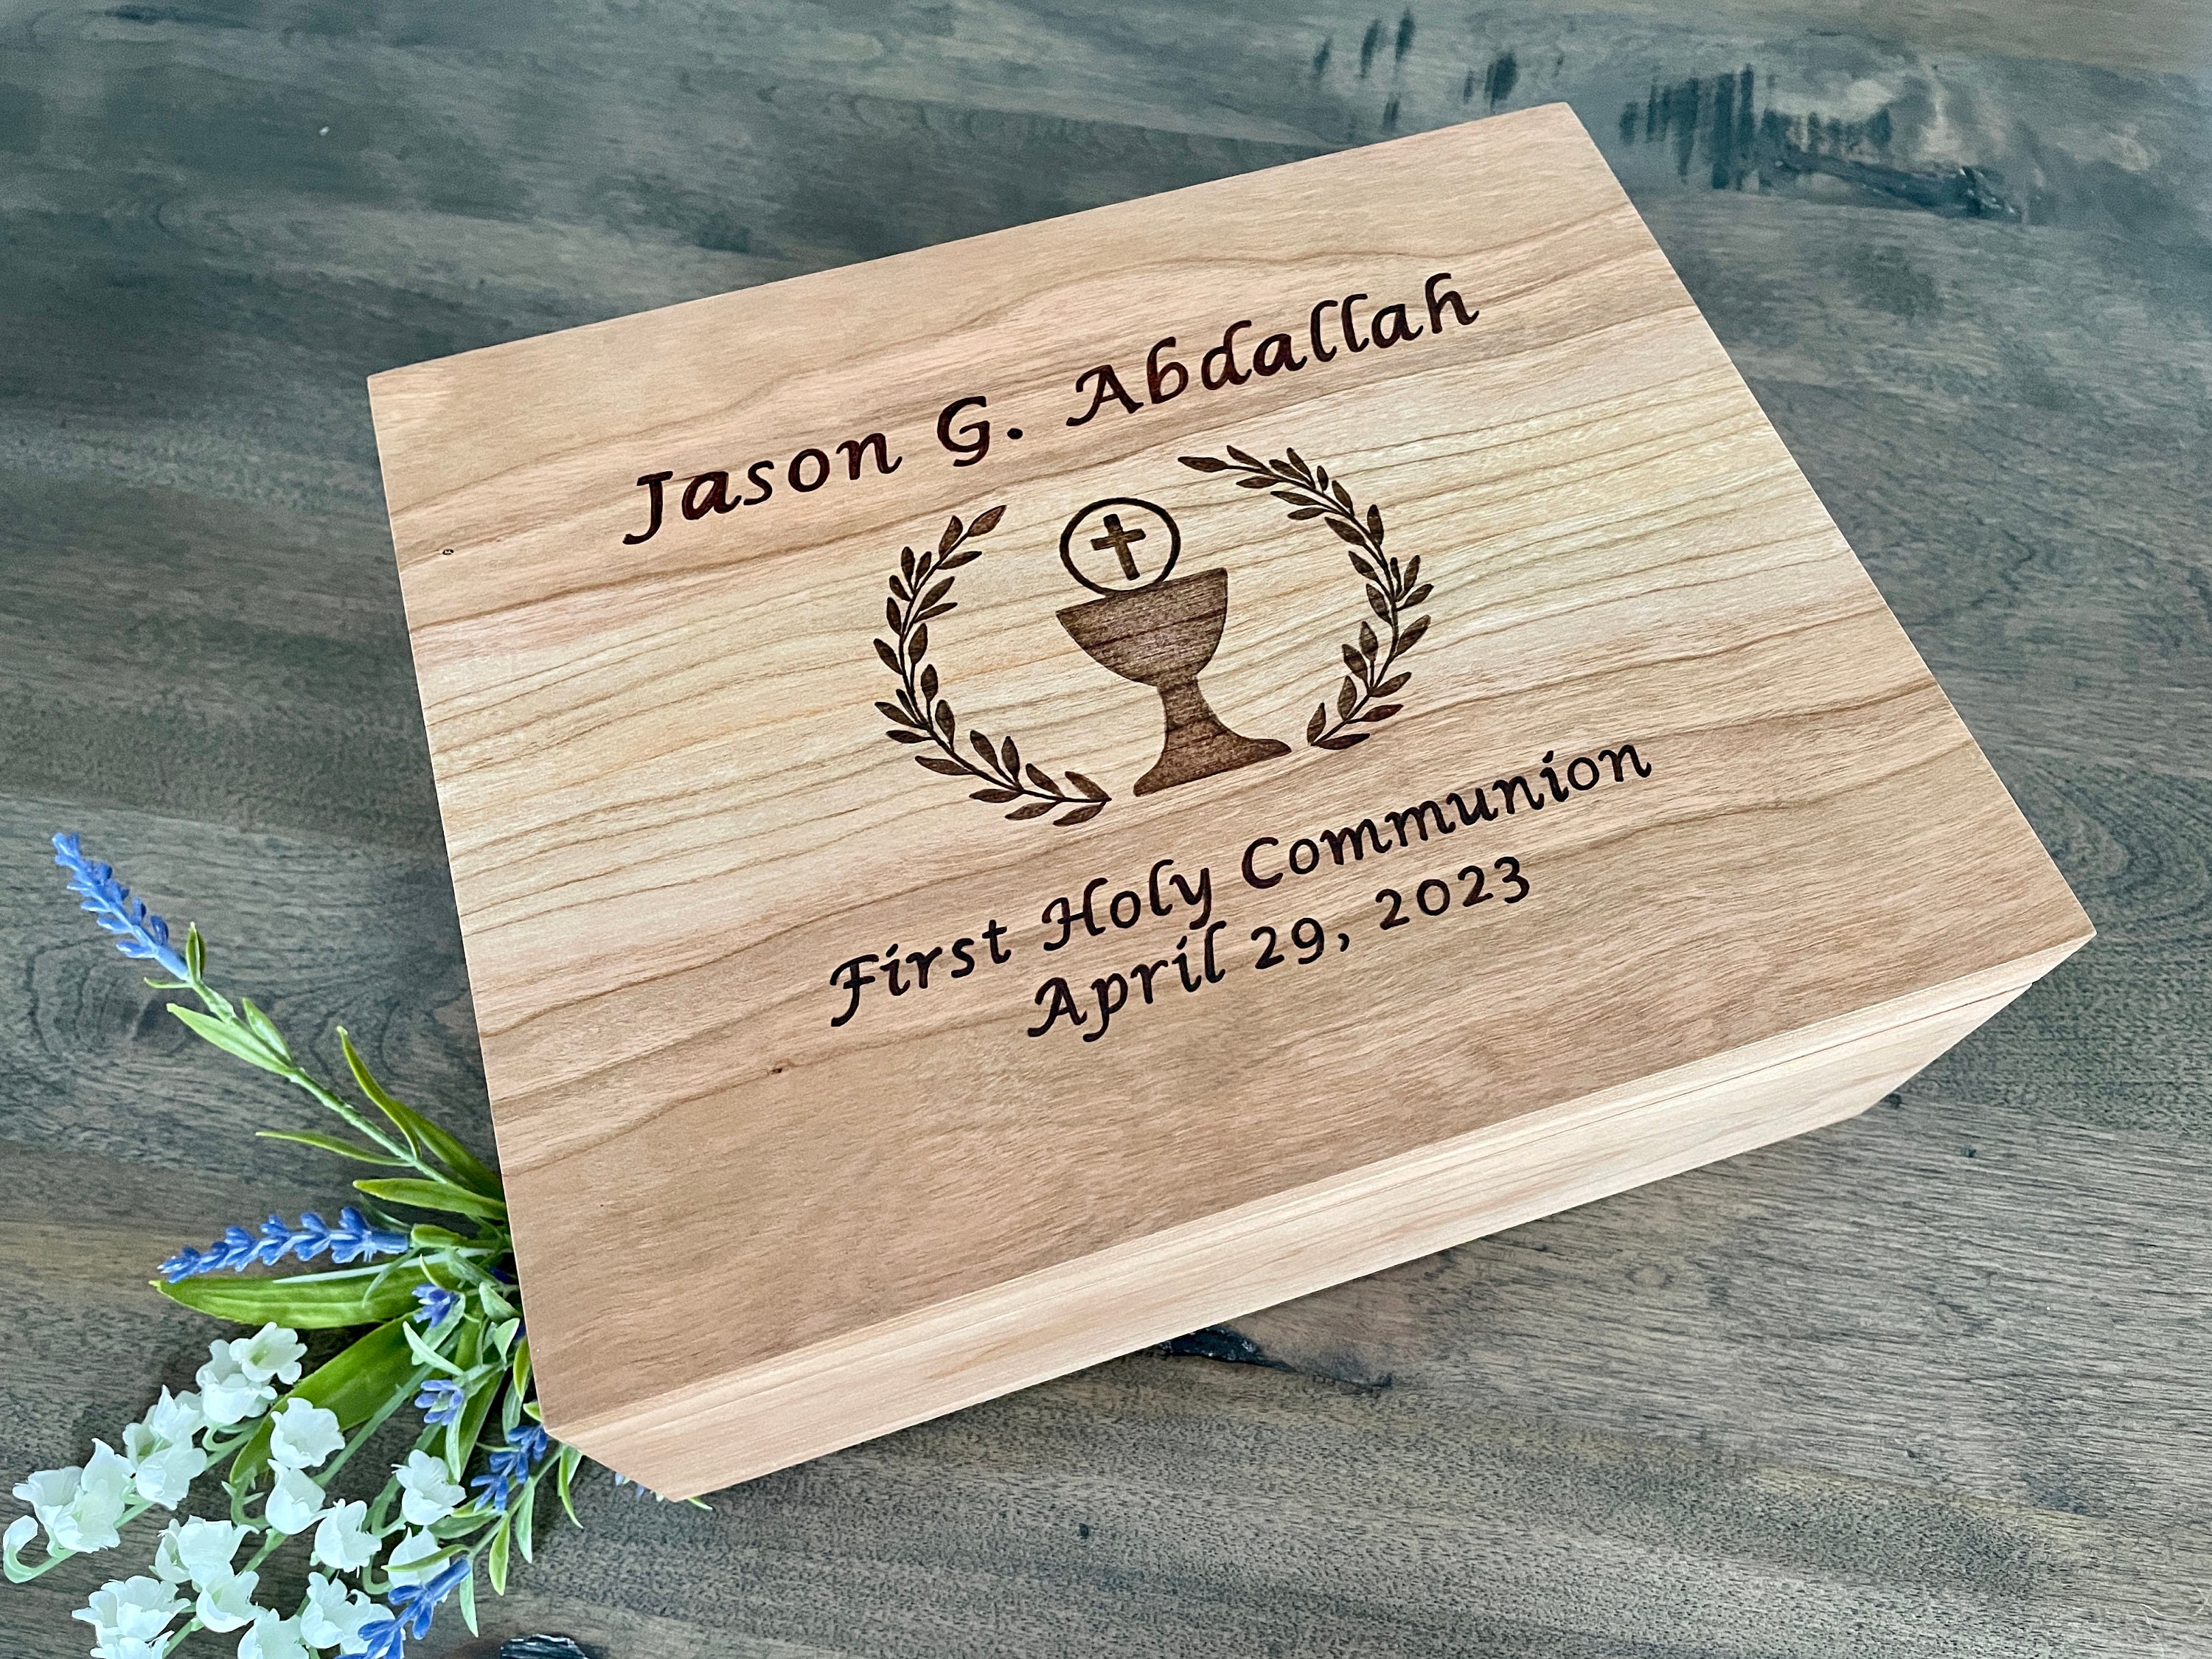 I'm completely new to wood burning and I'm working on a memory box